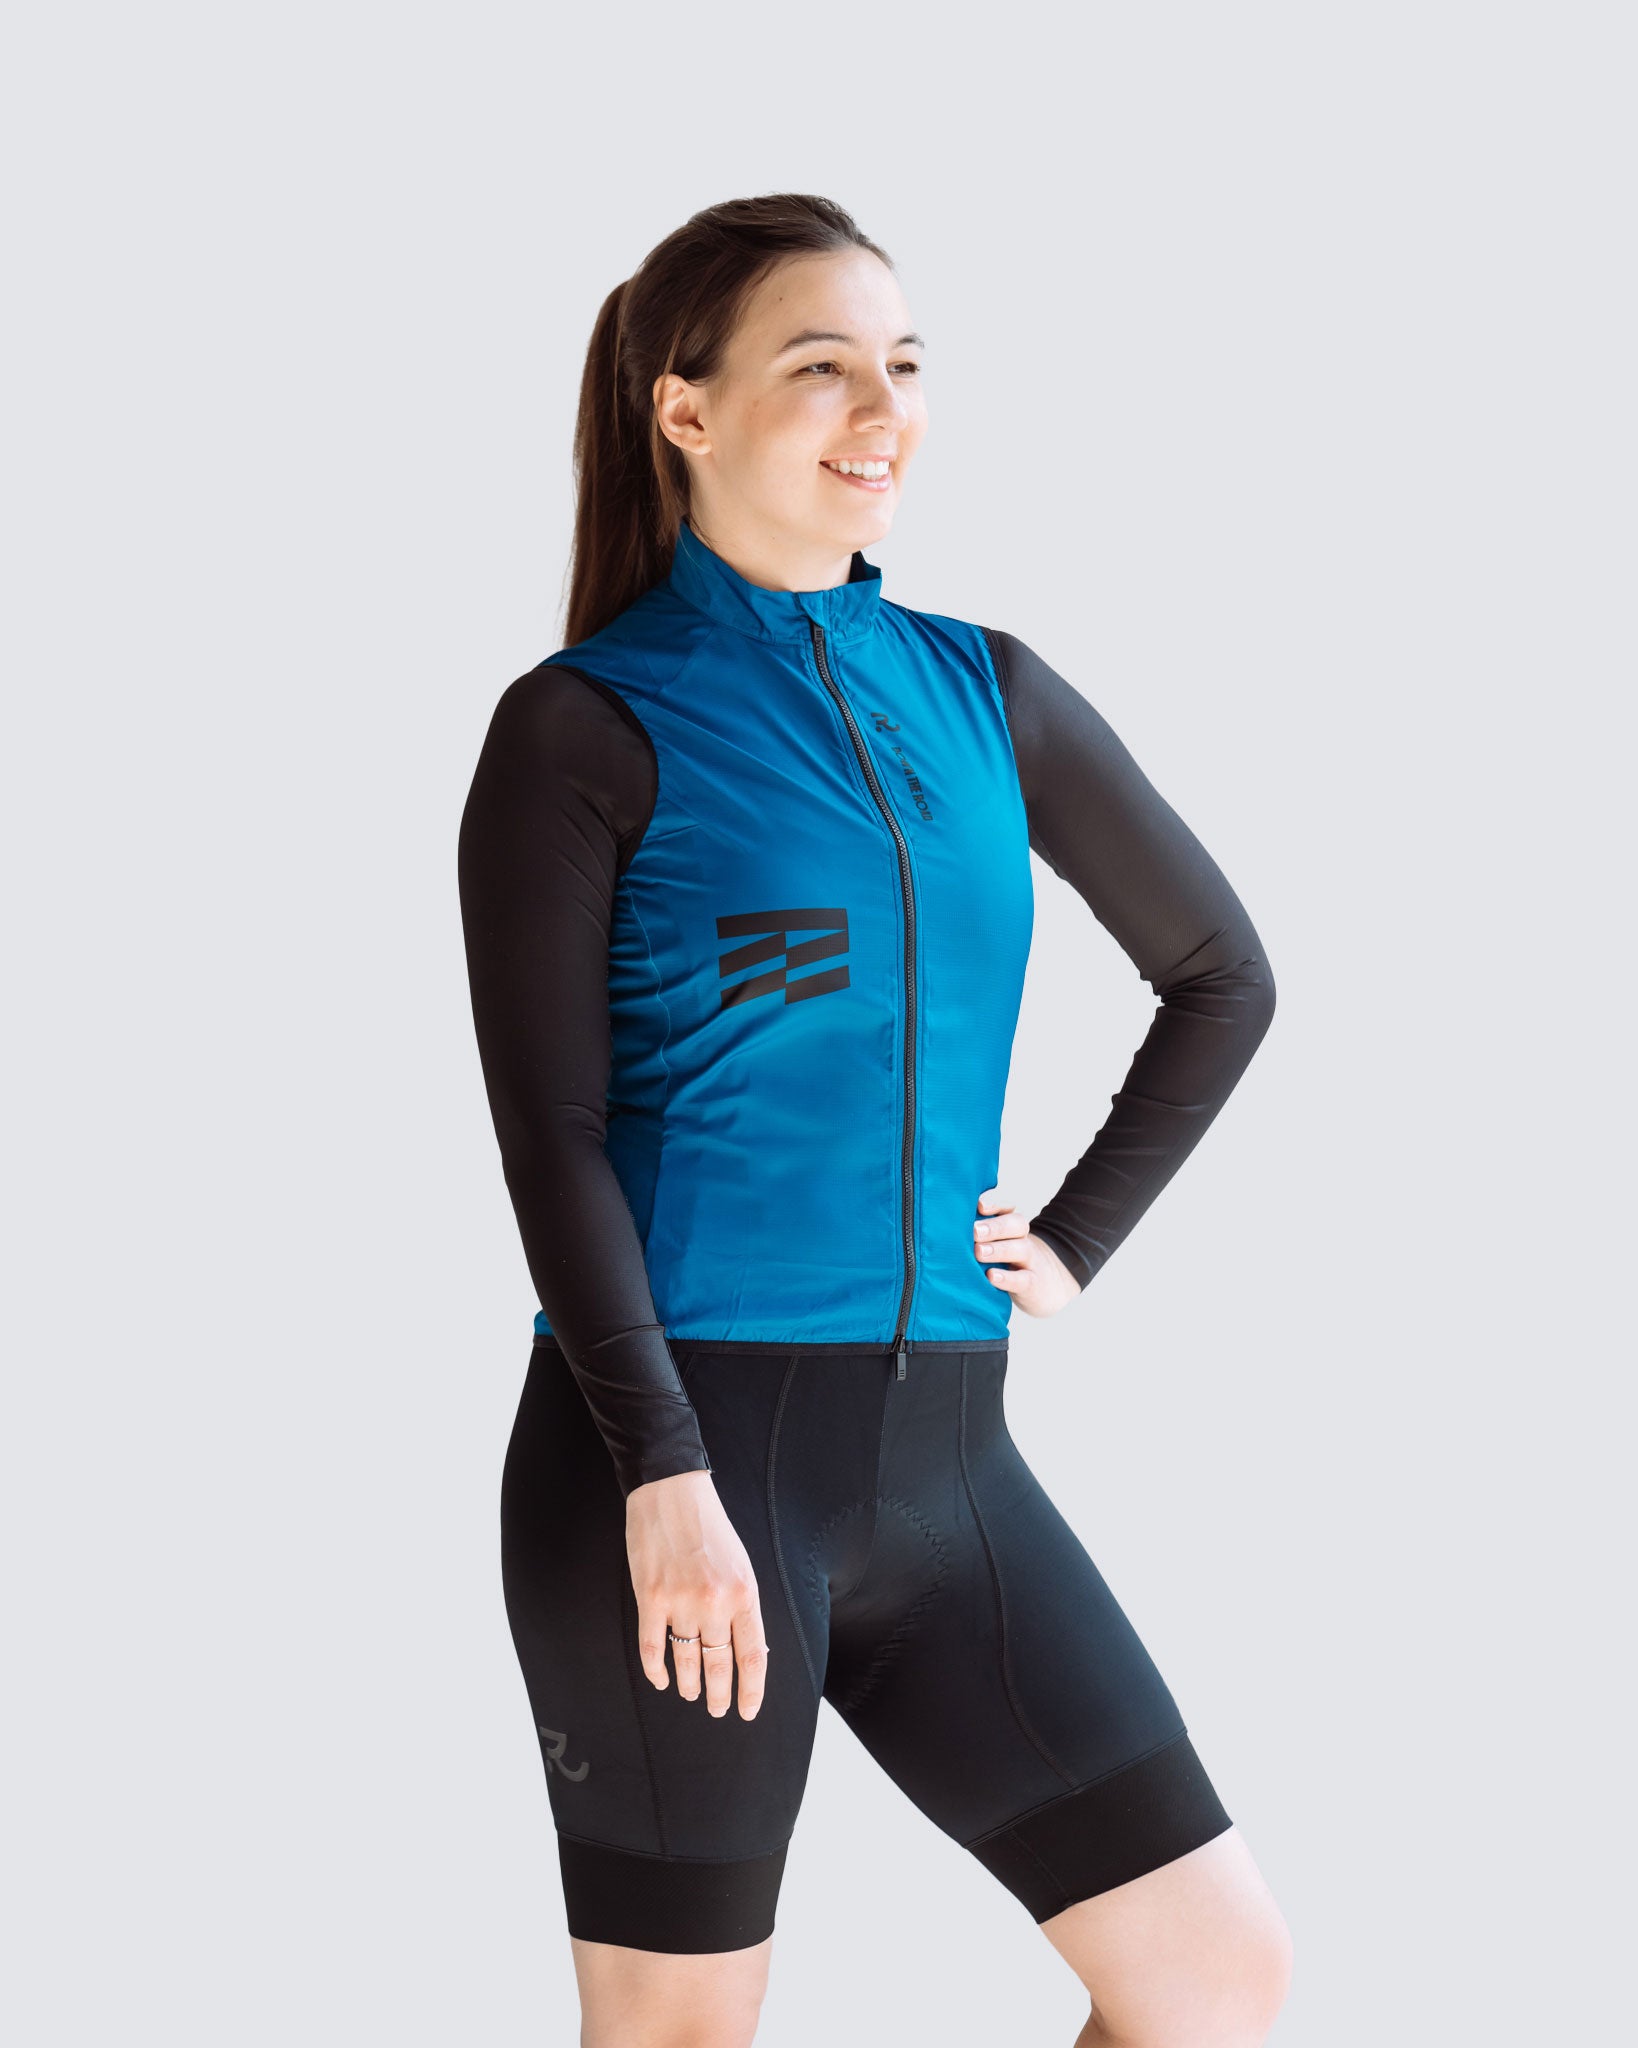 side view of wavy teal cycling vest and bib shorts